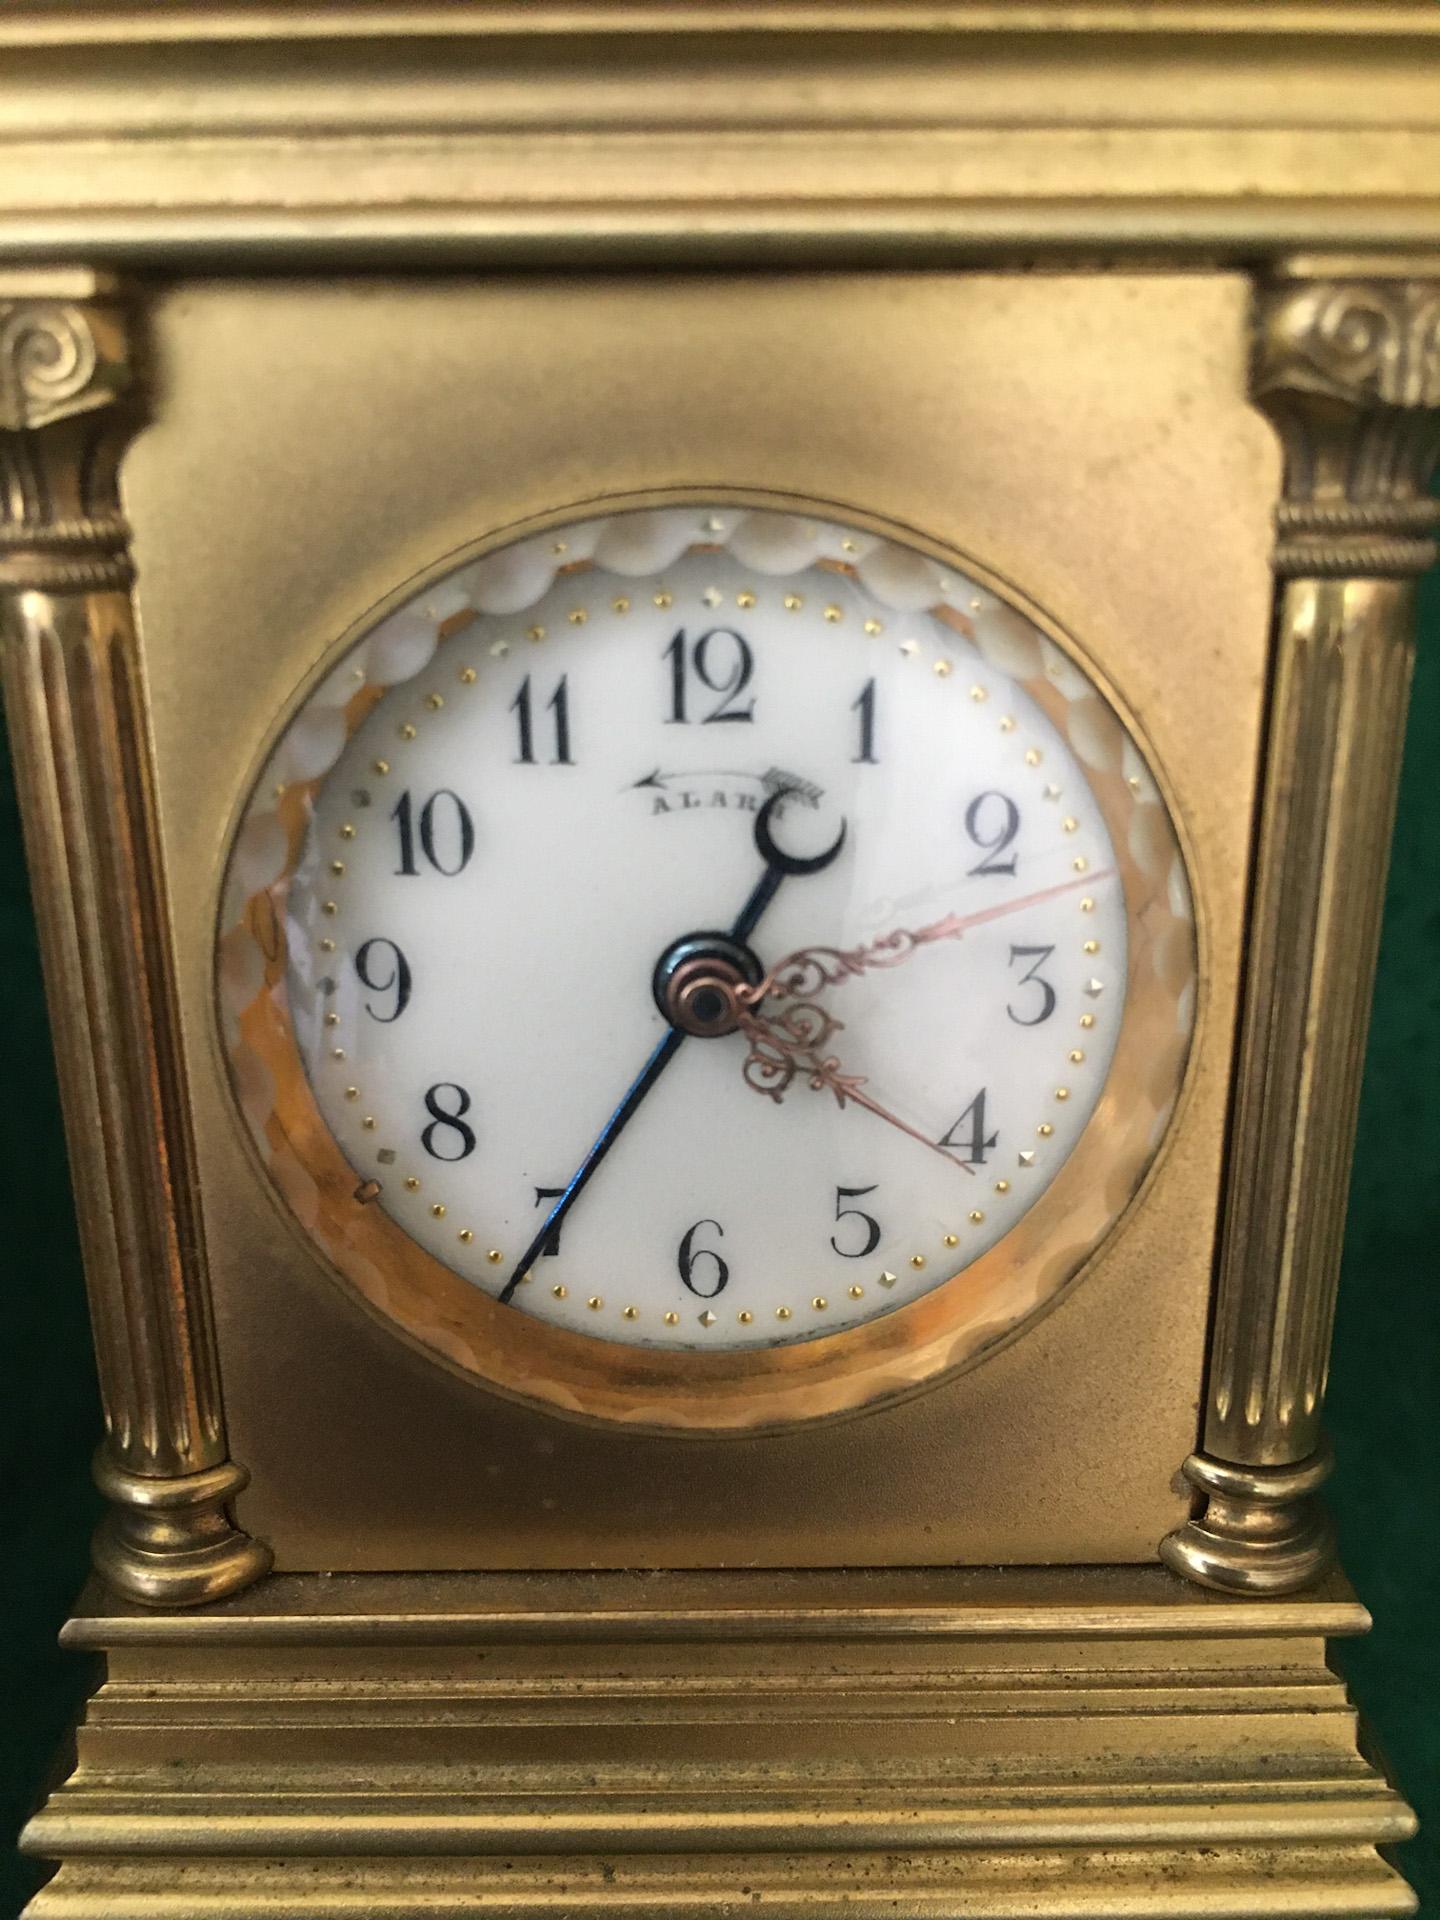 This miniature Swiss carriage clock features a gilded brass pillared case with rectangular top and folding handle over push repeat button, above four solid sides held by fluted columns with Ionic capitals and
hinged rear door. The whole is on a